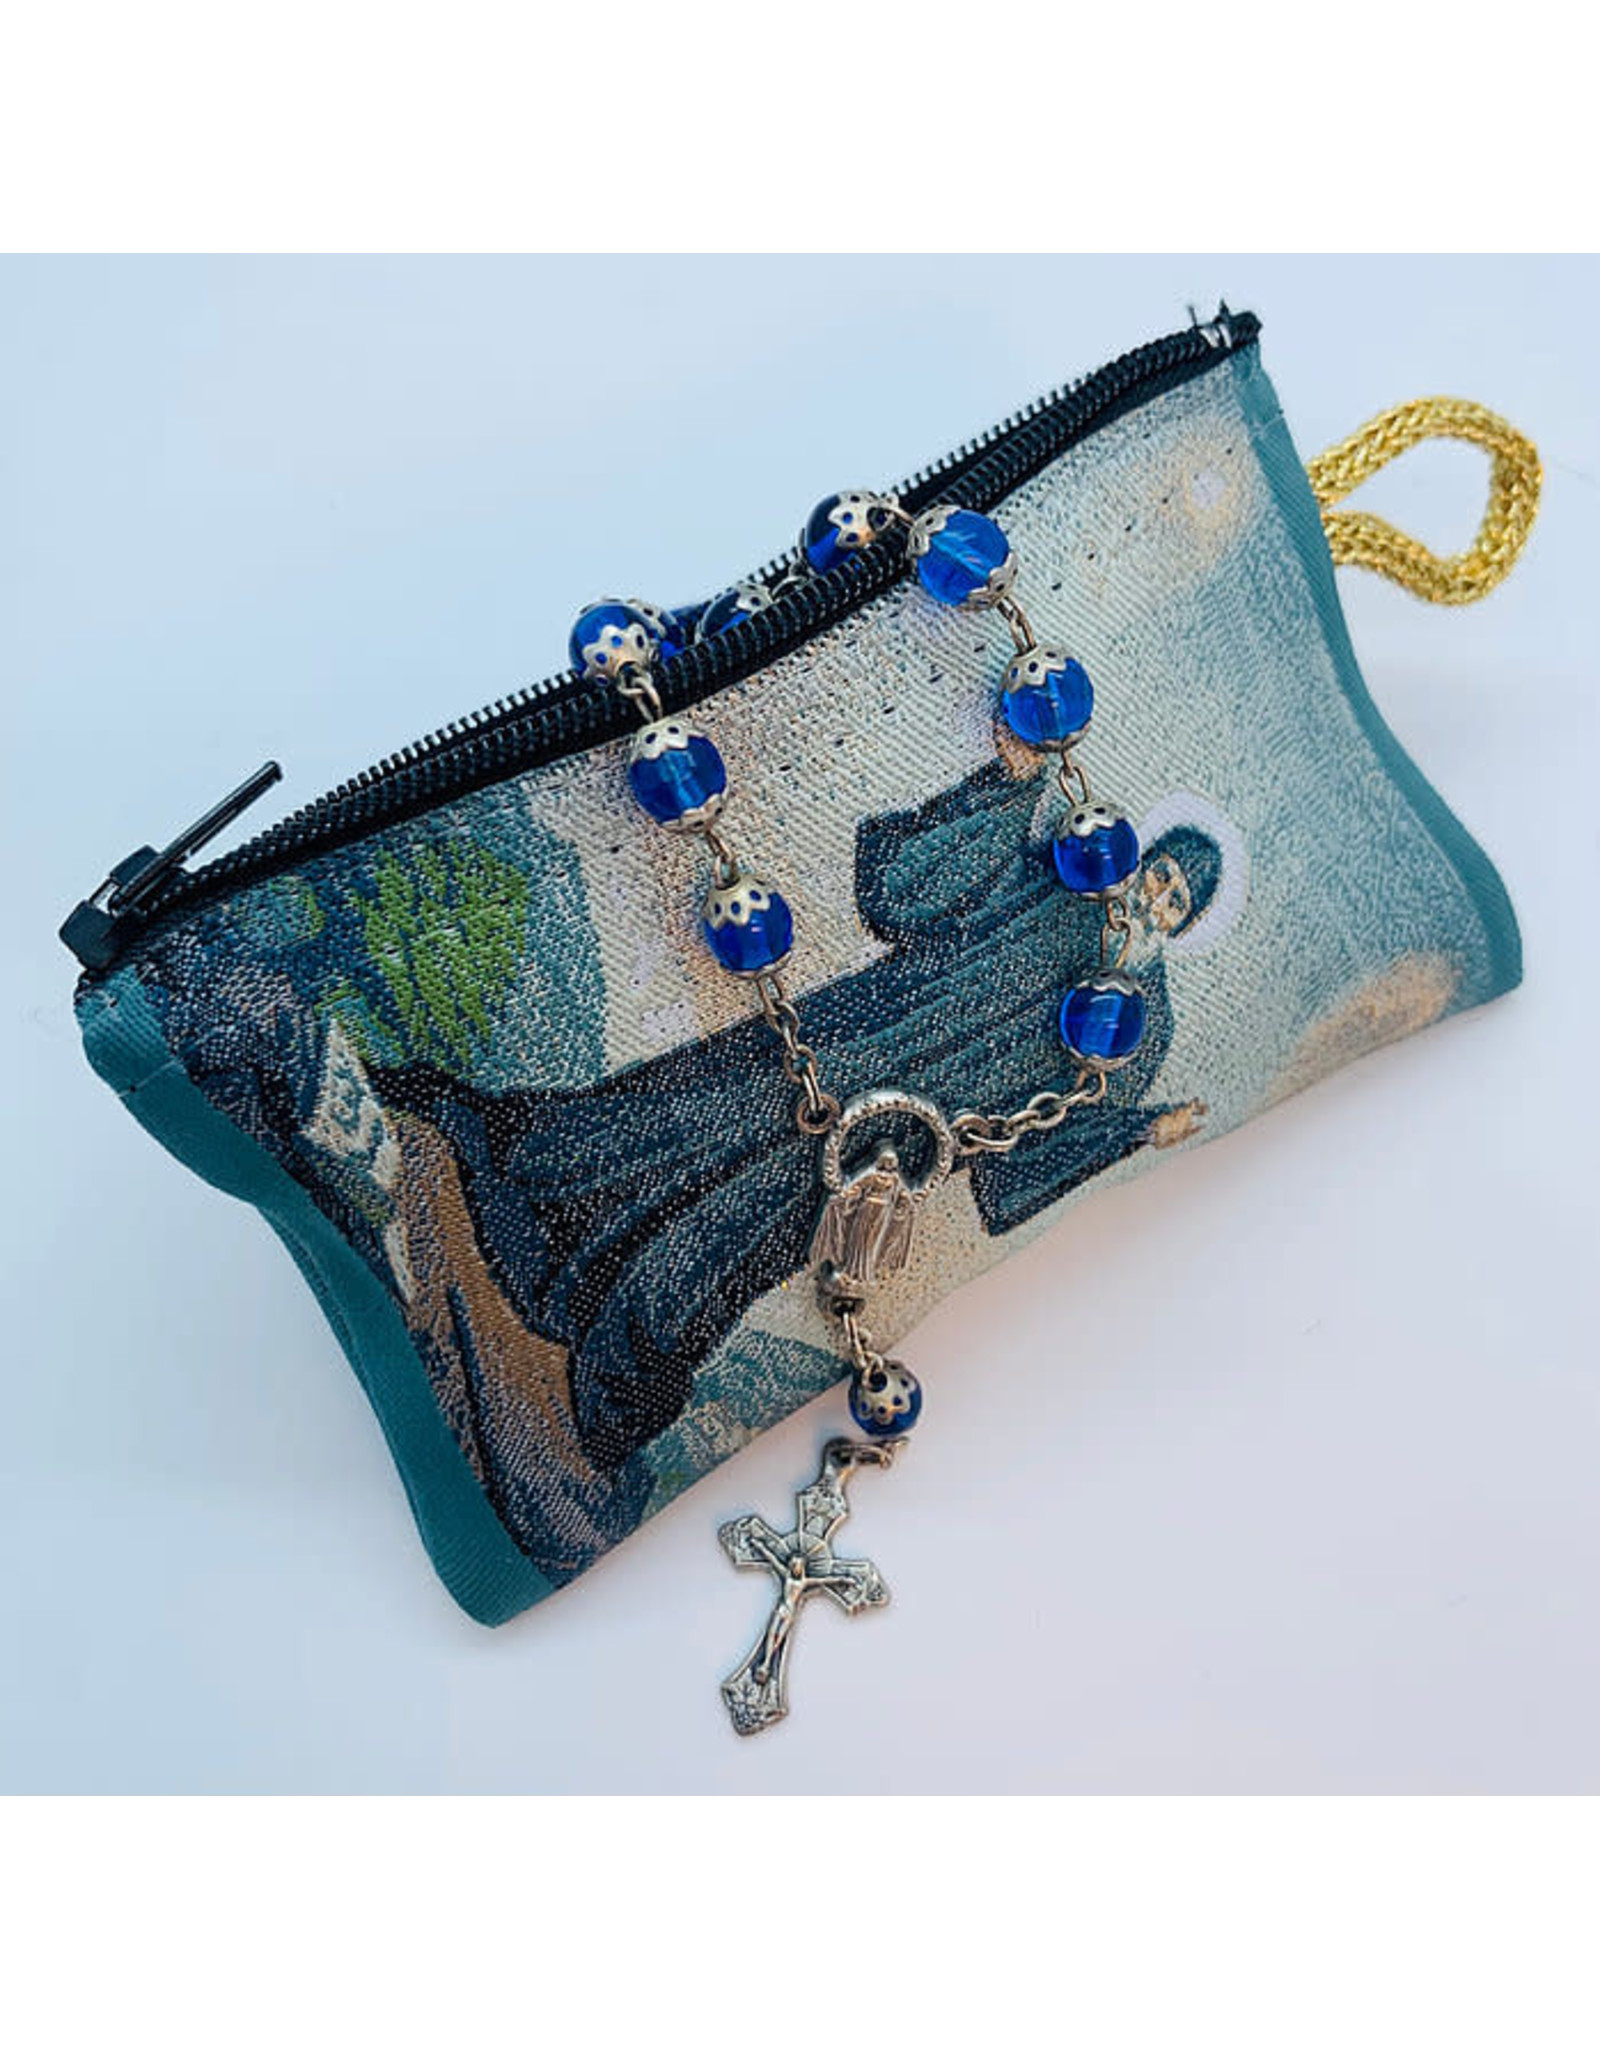 Oremus Mercy Small Rosary Pouch – St. Charbel (3″ x 4″)